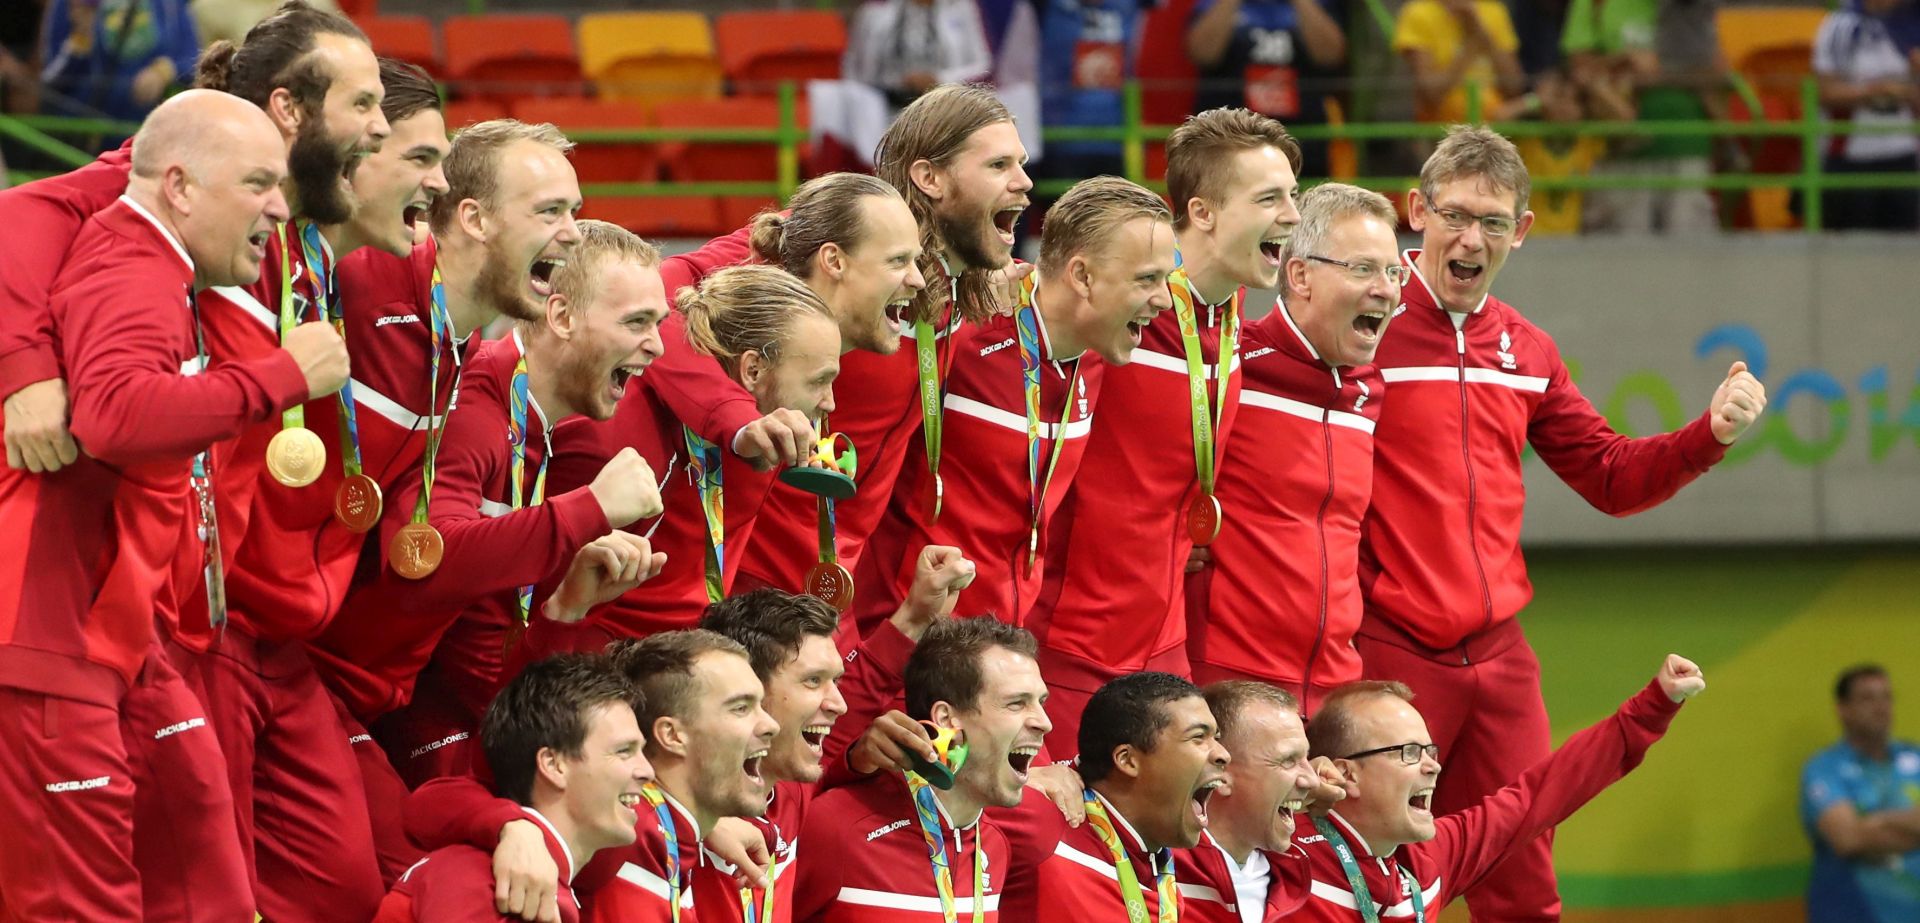 epa05505554 The Gold medal team of Denmark react during the awarding ceremony of the men's Handball tournament for the Rio 2016 Olympic Games at the Future Arena in the Olympic Park in Rio de Janeiro, Brazil, 21 August 2016.  EPA/SRDJAN SUKI